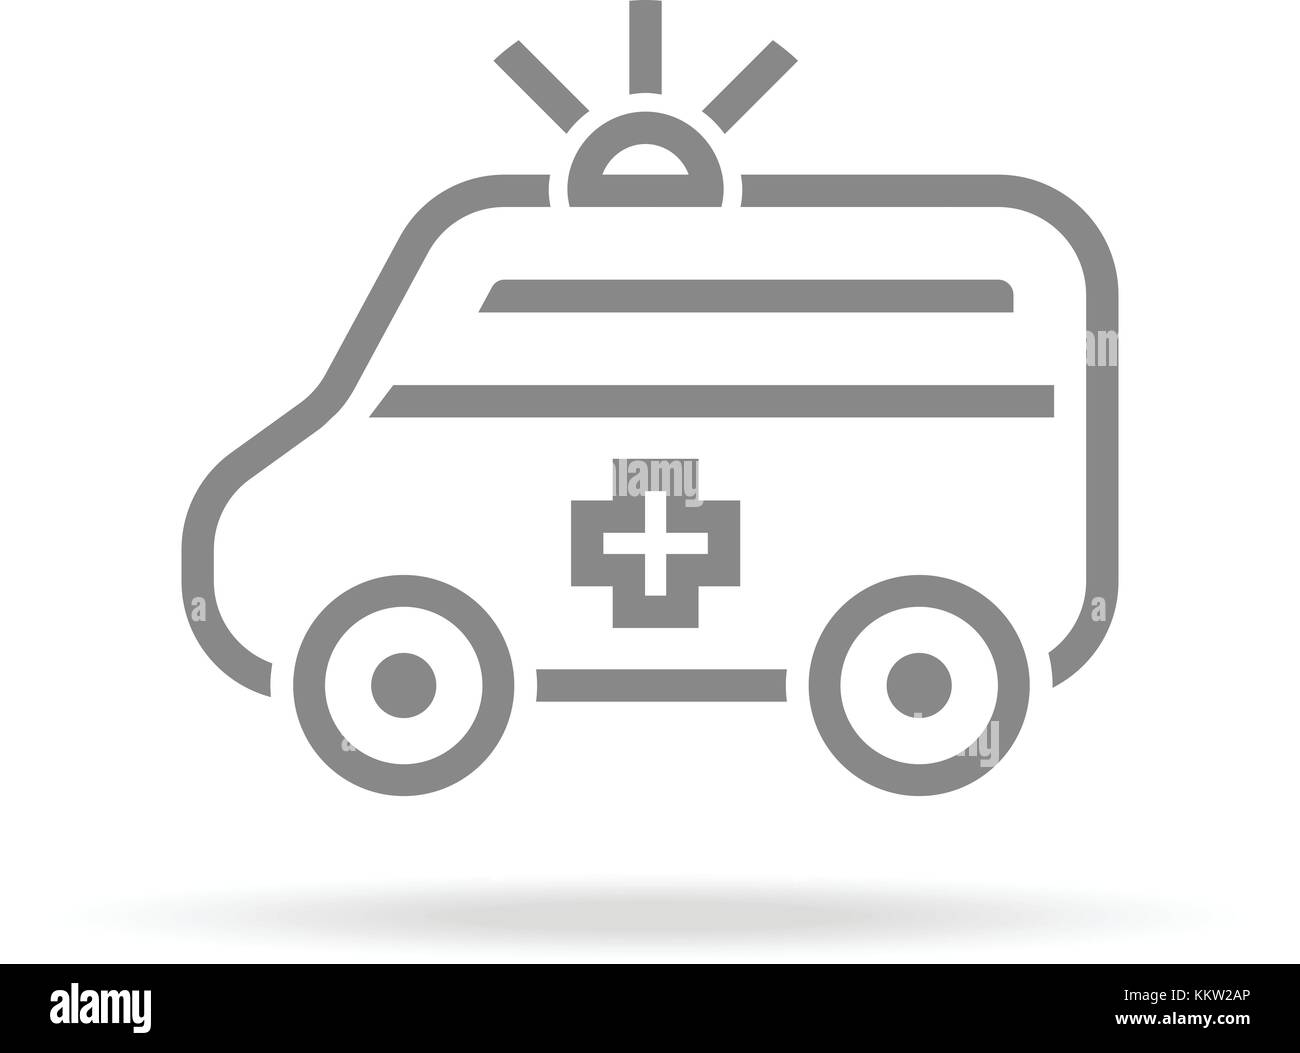 Ambulance Icon In Trendy Thin Line Style Isolated On White Background. Medical Symbol For Your Design, Apps, Logo, UI. Vector Illustration, Eps10. Stock Vector